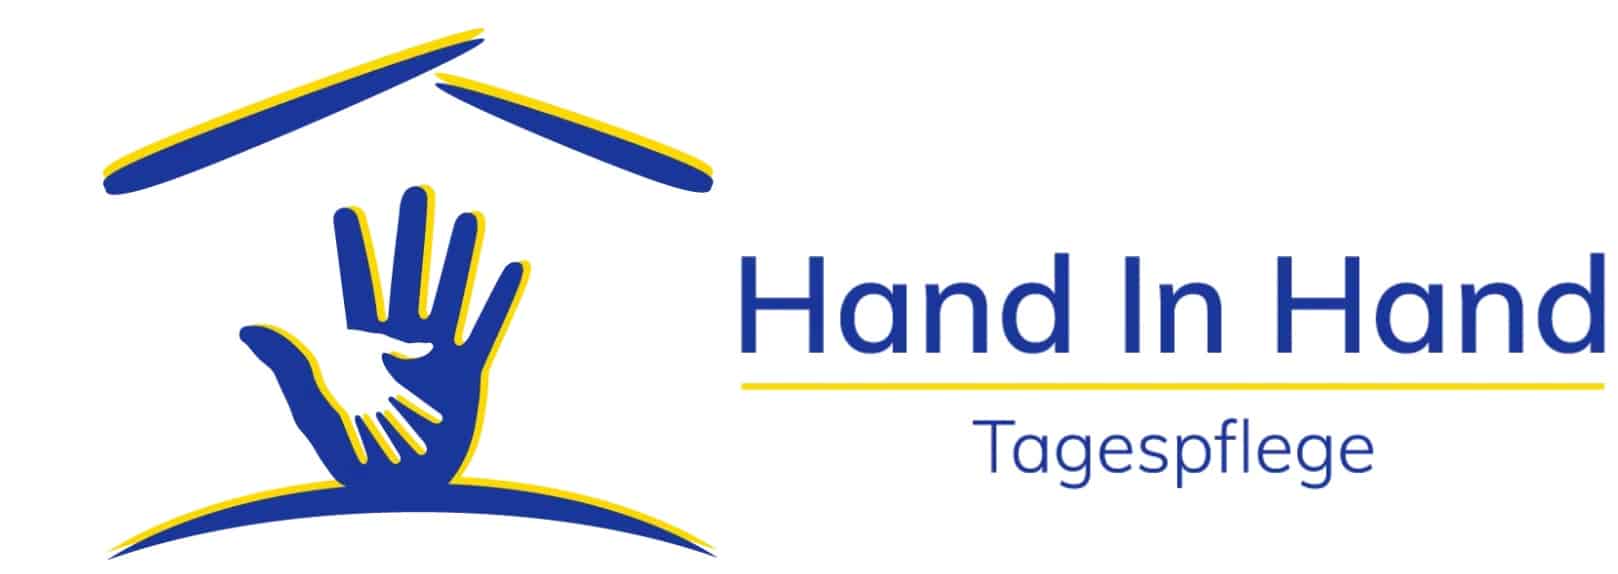 Hand-In-Hand Tagespflege